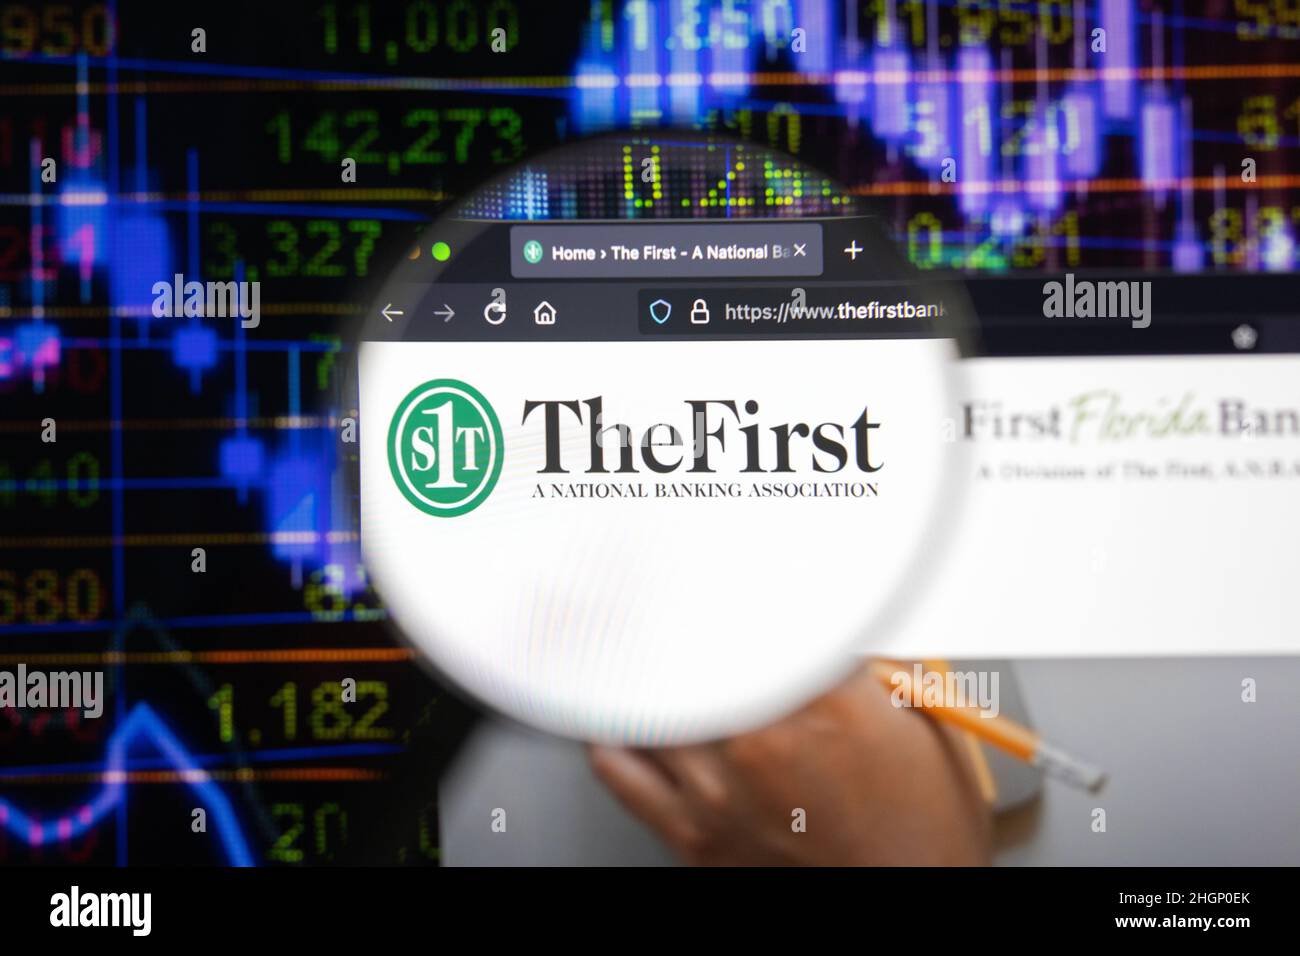 First Bancshares, Inc. company logo on a website with blurry stock market developments in the background, seen on a computer screen Stock Photo